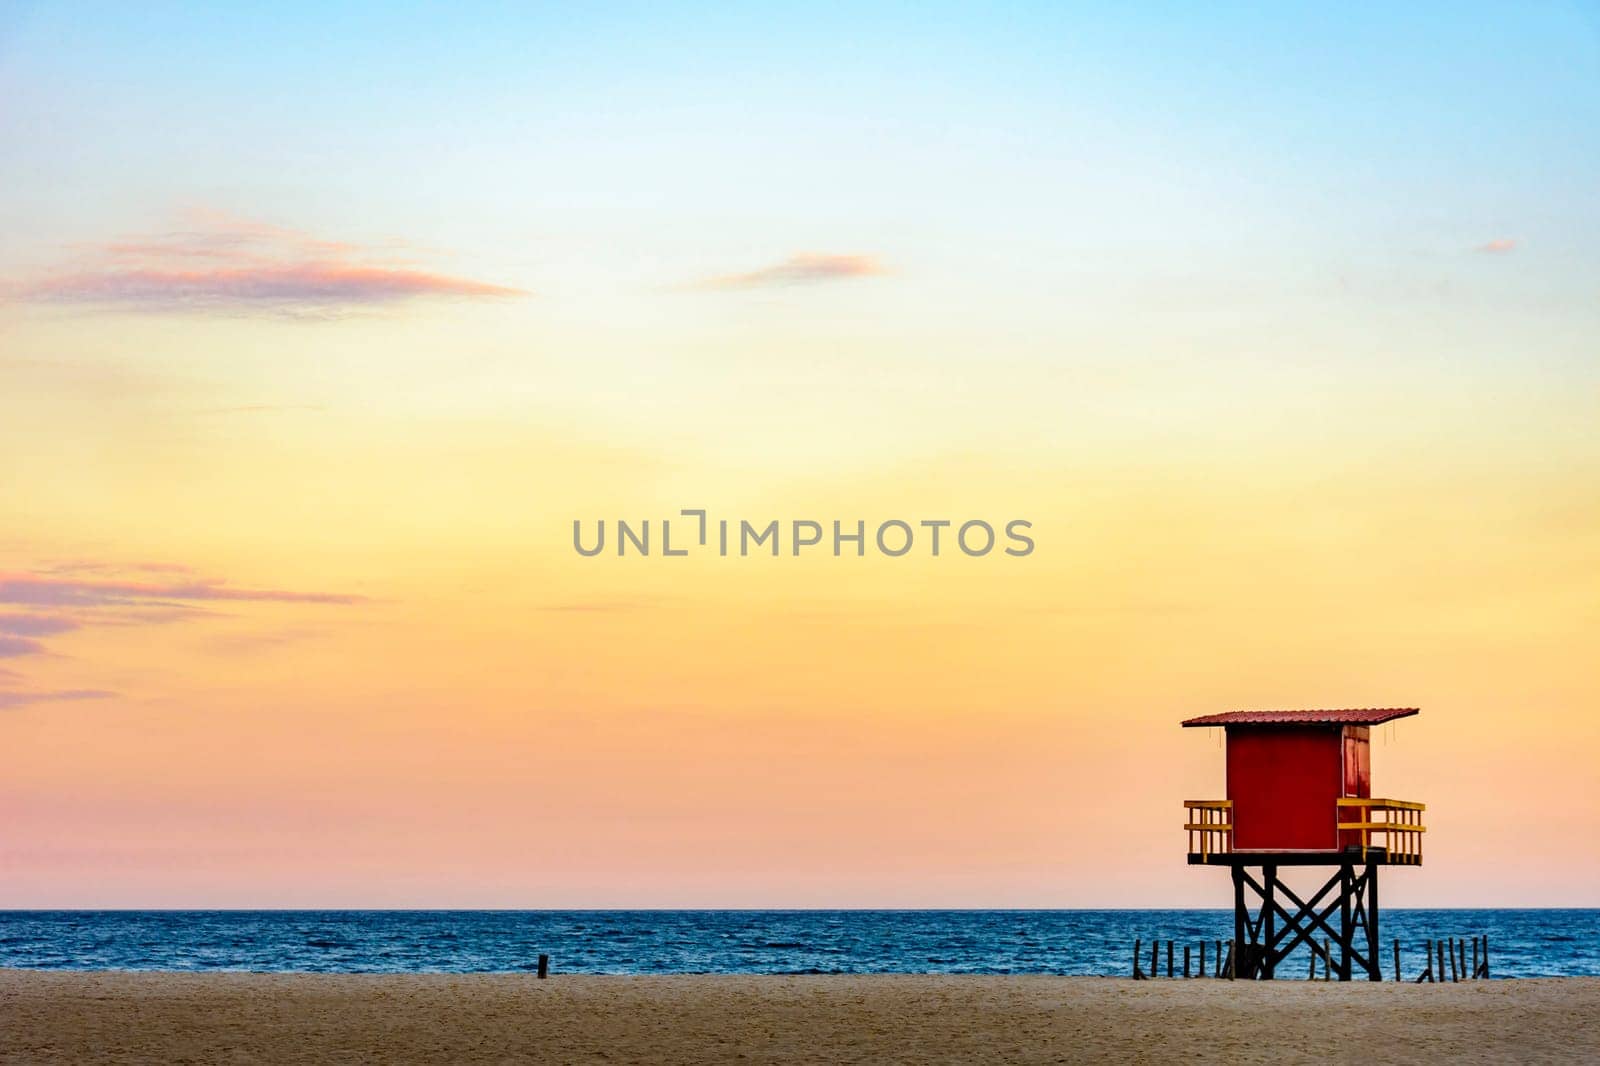 Rescue cabin on Copacabana beach at a sunset by Fred_Pinheiro